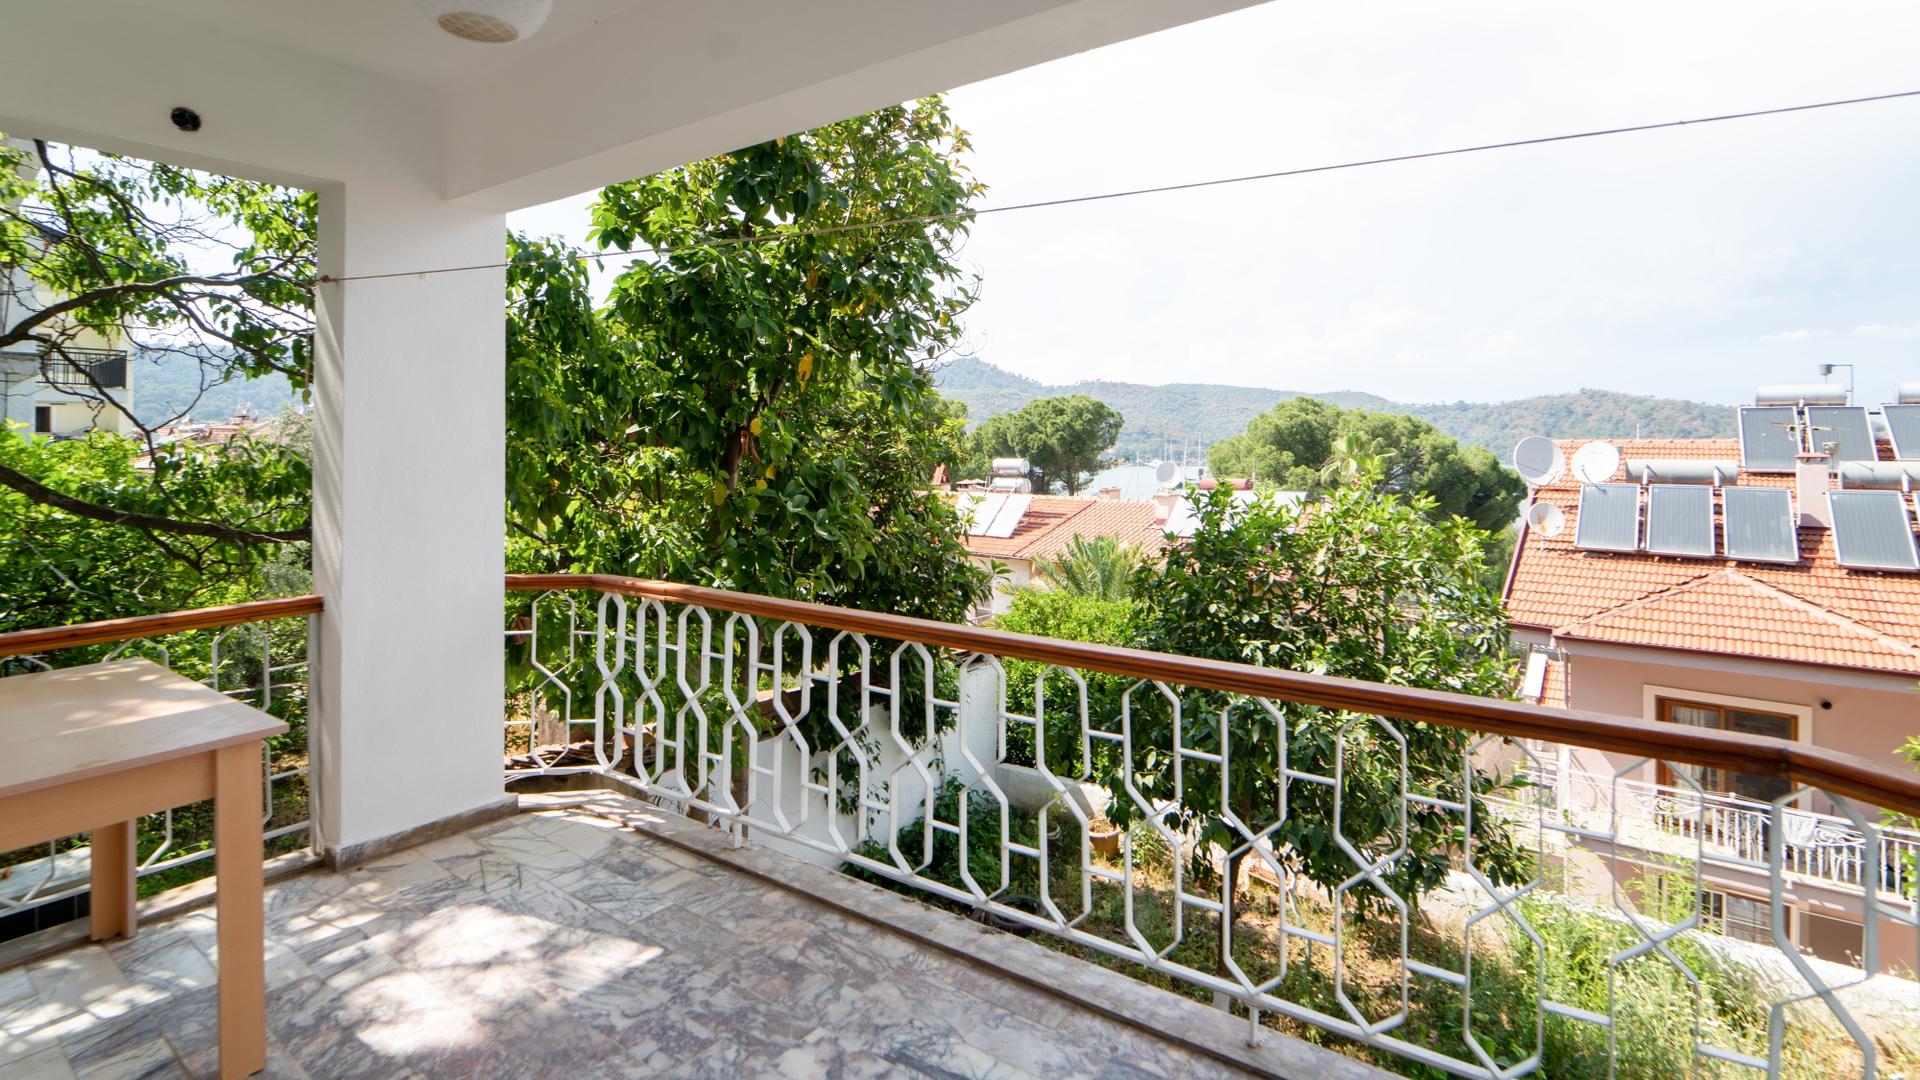 Enjoy morning coffee or evening drinks on our house's balcony, while admiring the captivating nature views.